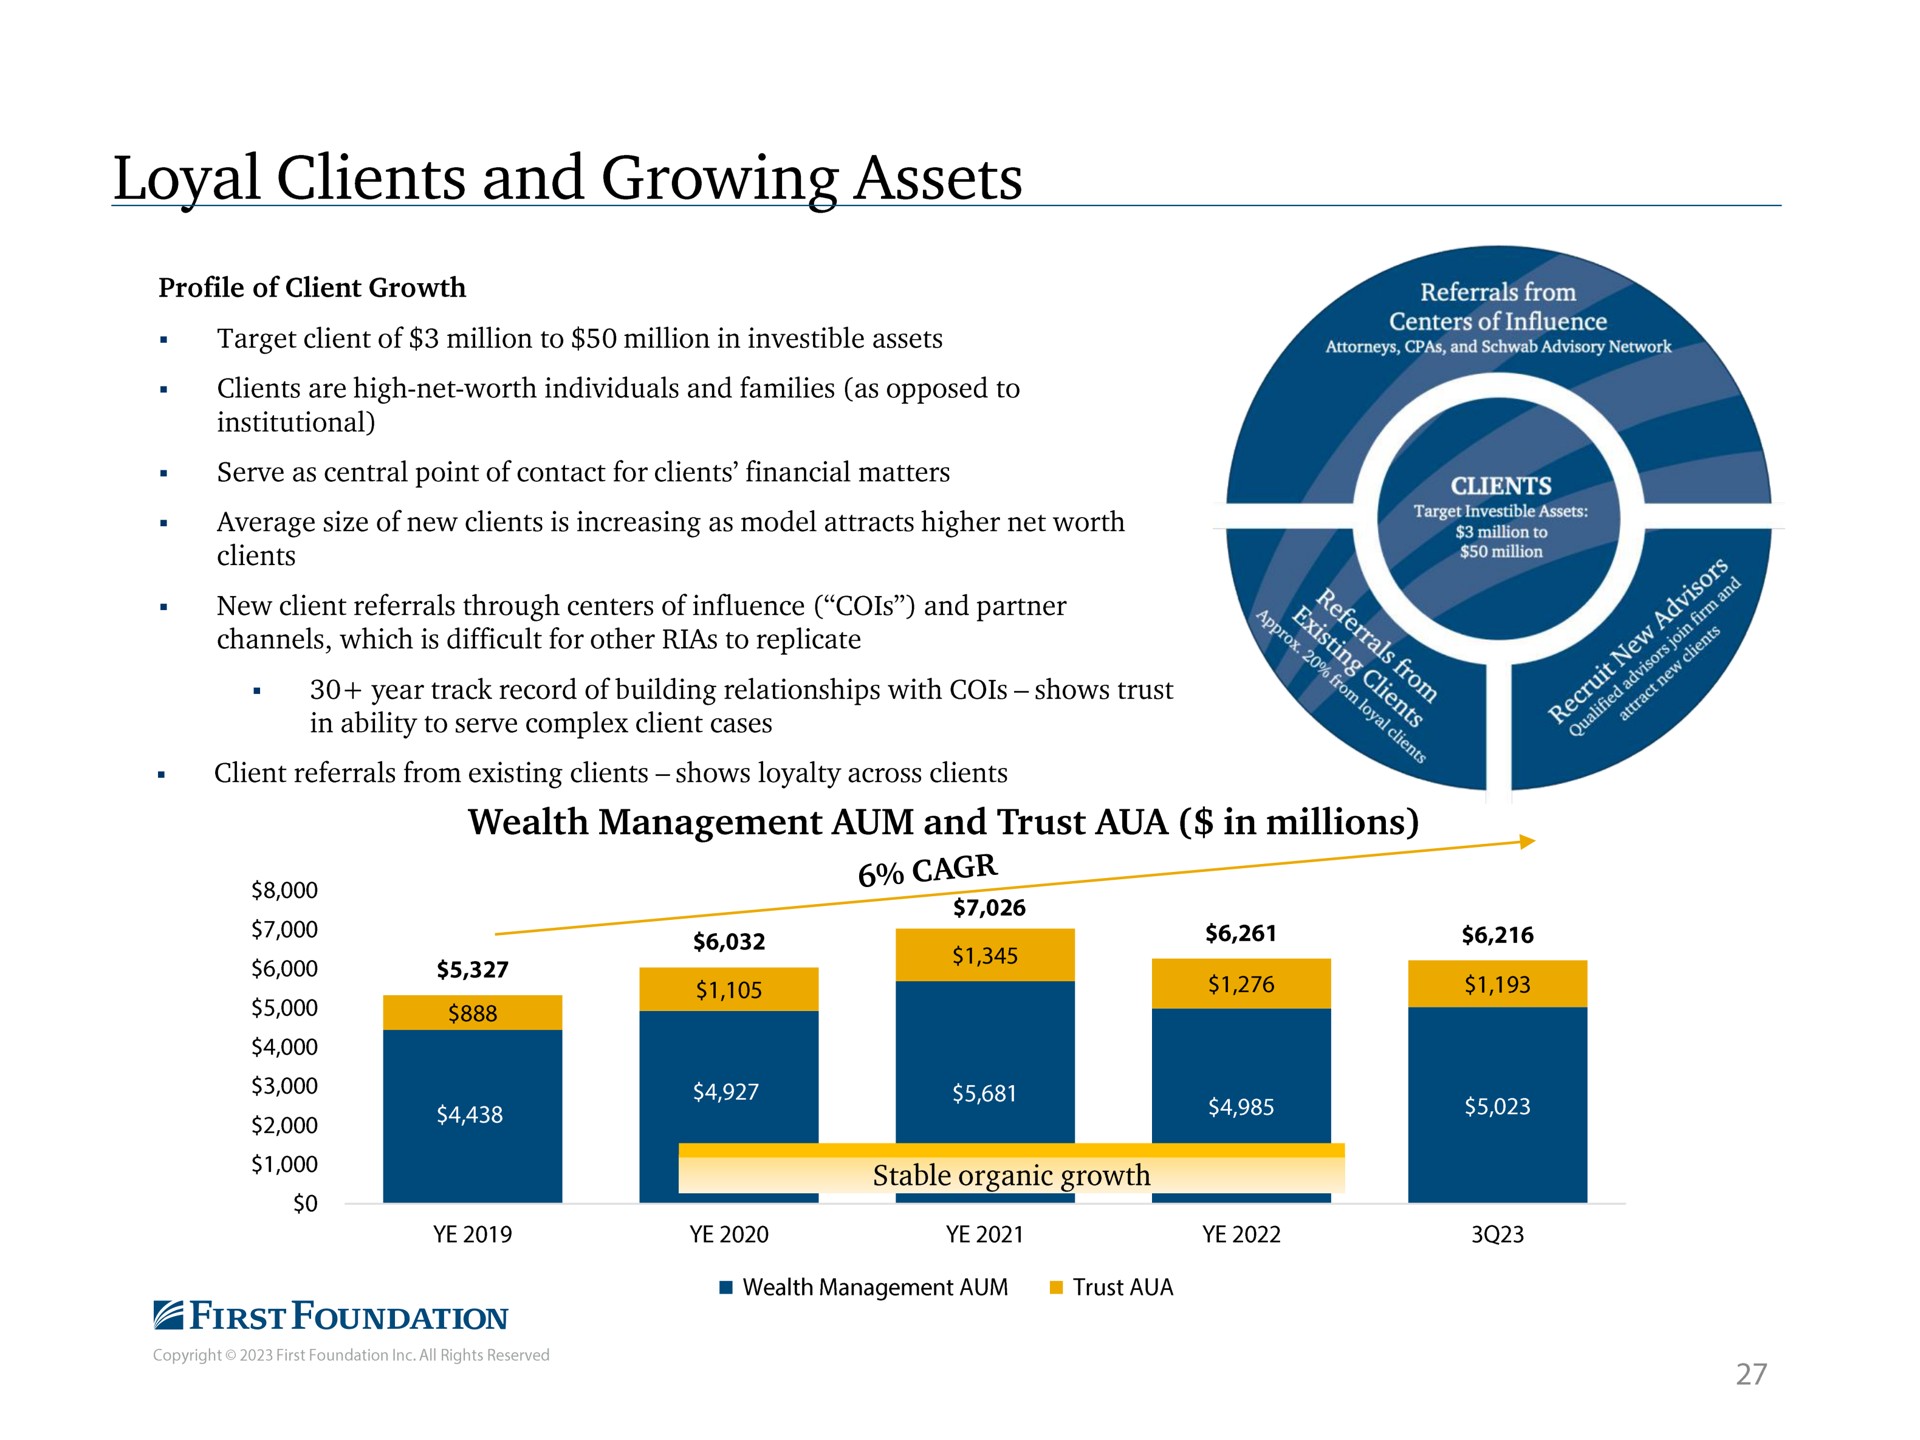 loyal clients and growing assets | First Foundation